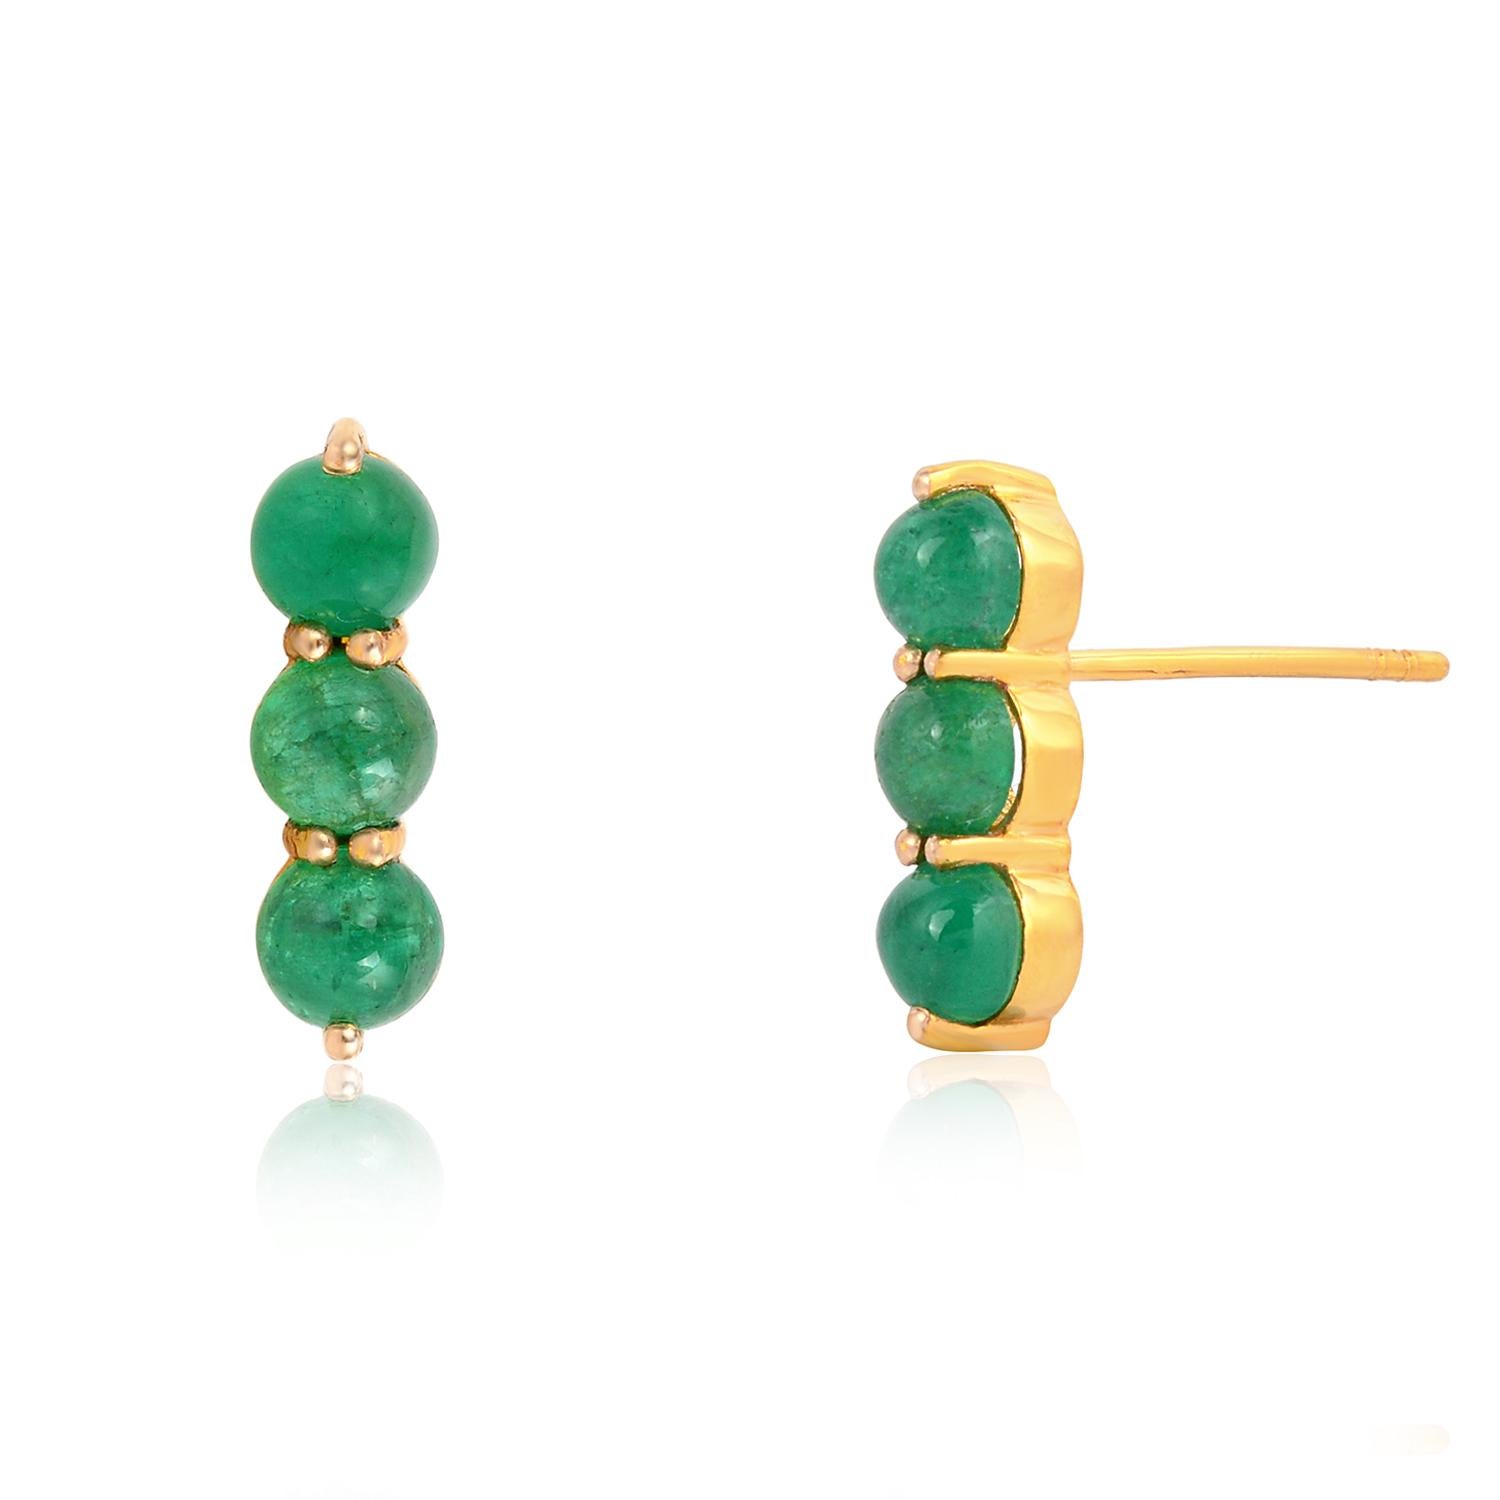 These gorgeous three-tier stud earrings, available in turquoise and emerald gemstones, strike the perfect balance of elegance and simplicity. Made with 14K yellow gold, you are sure to impress with these delicate beauties. Wear yours with a